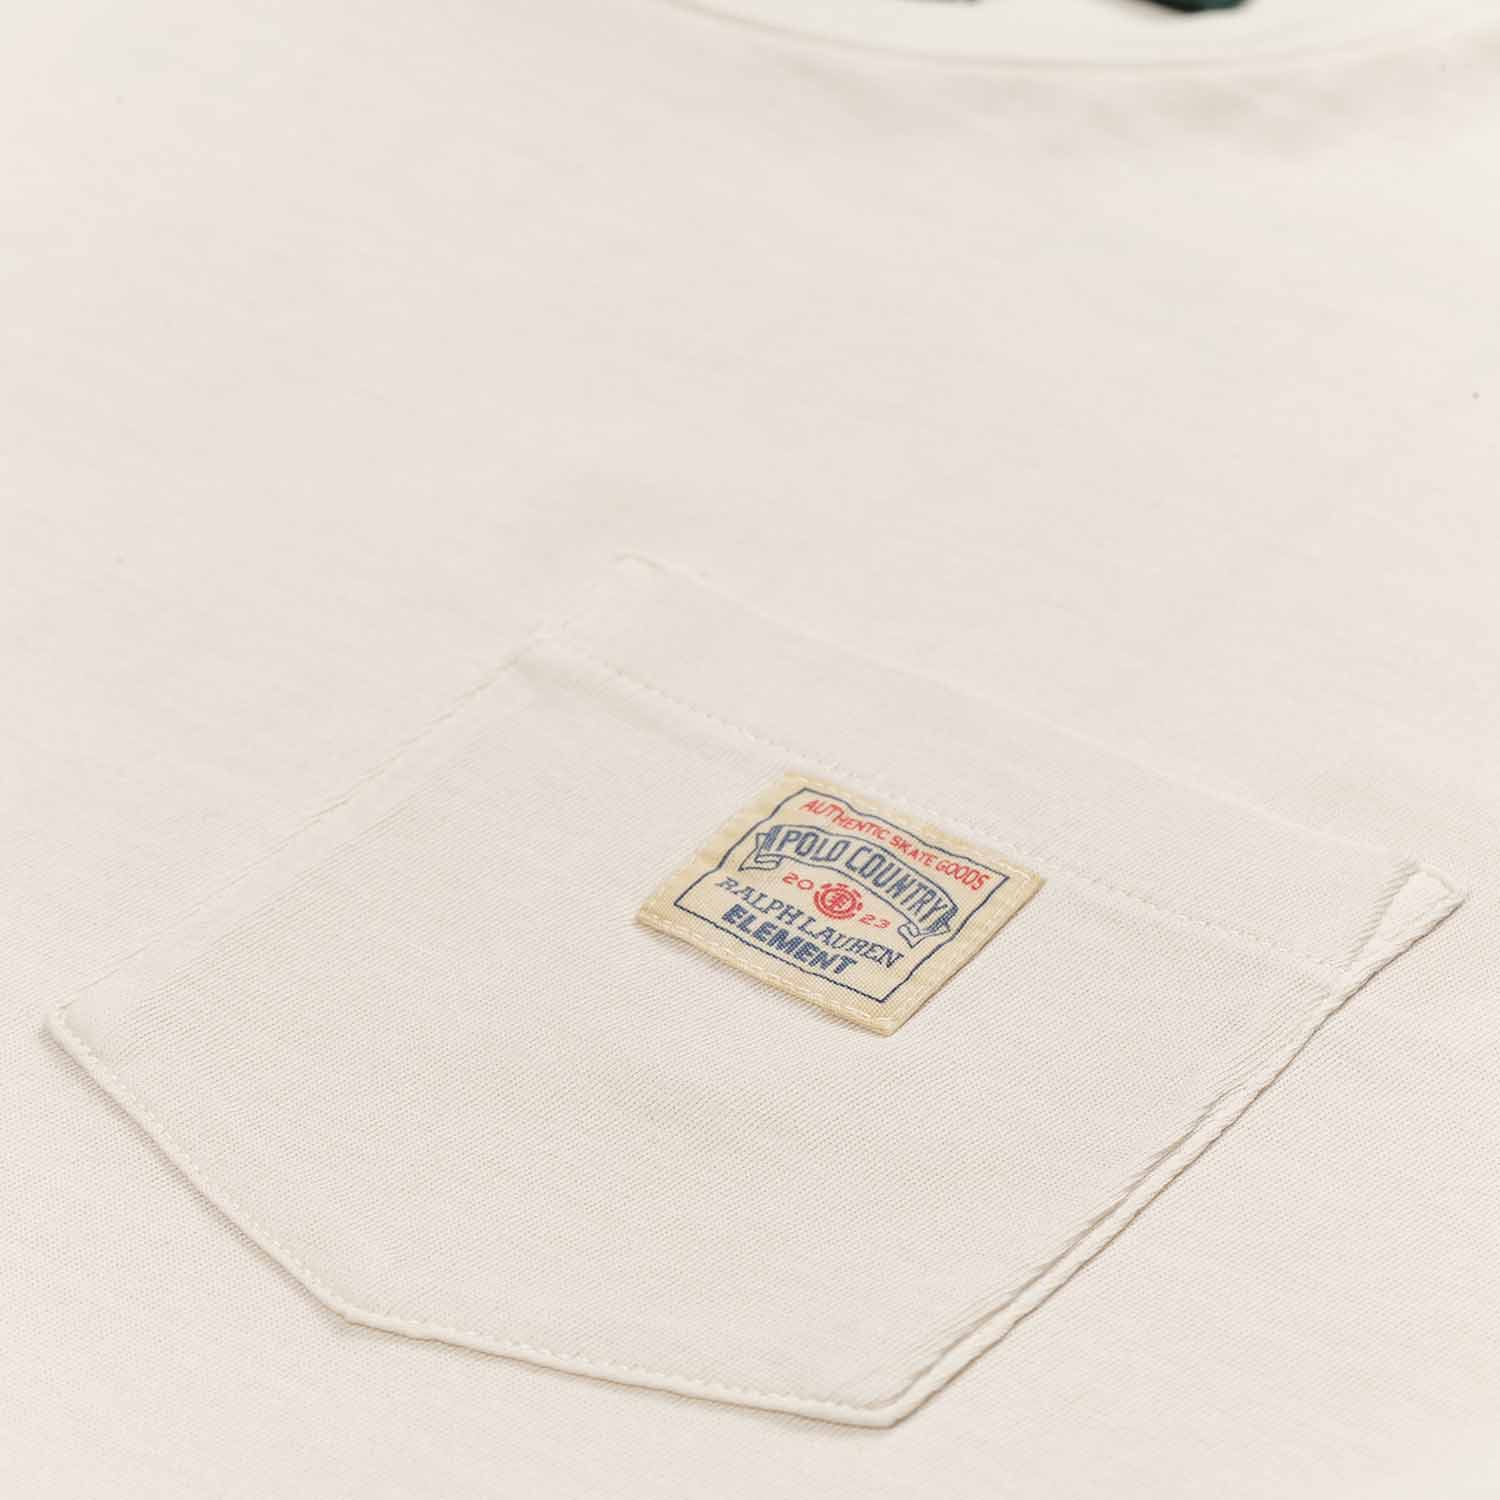 Polo Ralph Lauren x Element Pocket Tee in cream. Small front pocket on left breast with small square sewn on patch. Polo Ralph Lauren x Element logo on patch in red and blue.